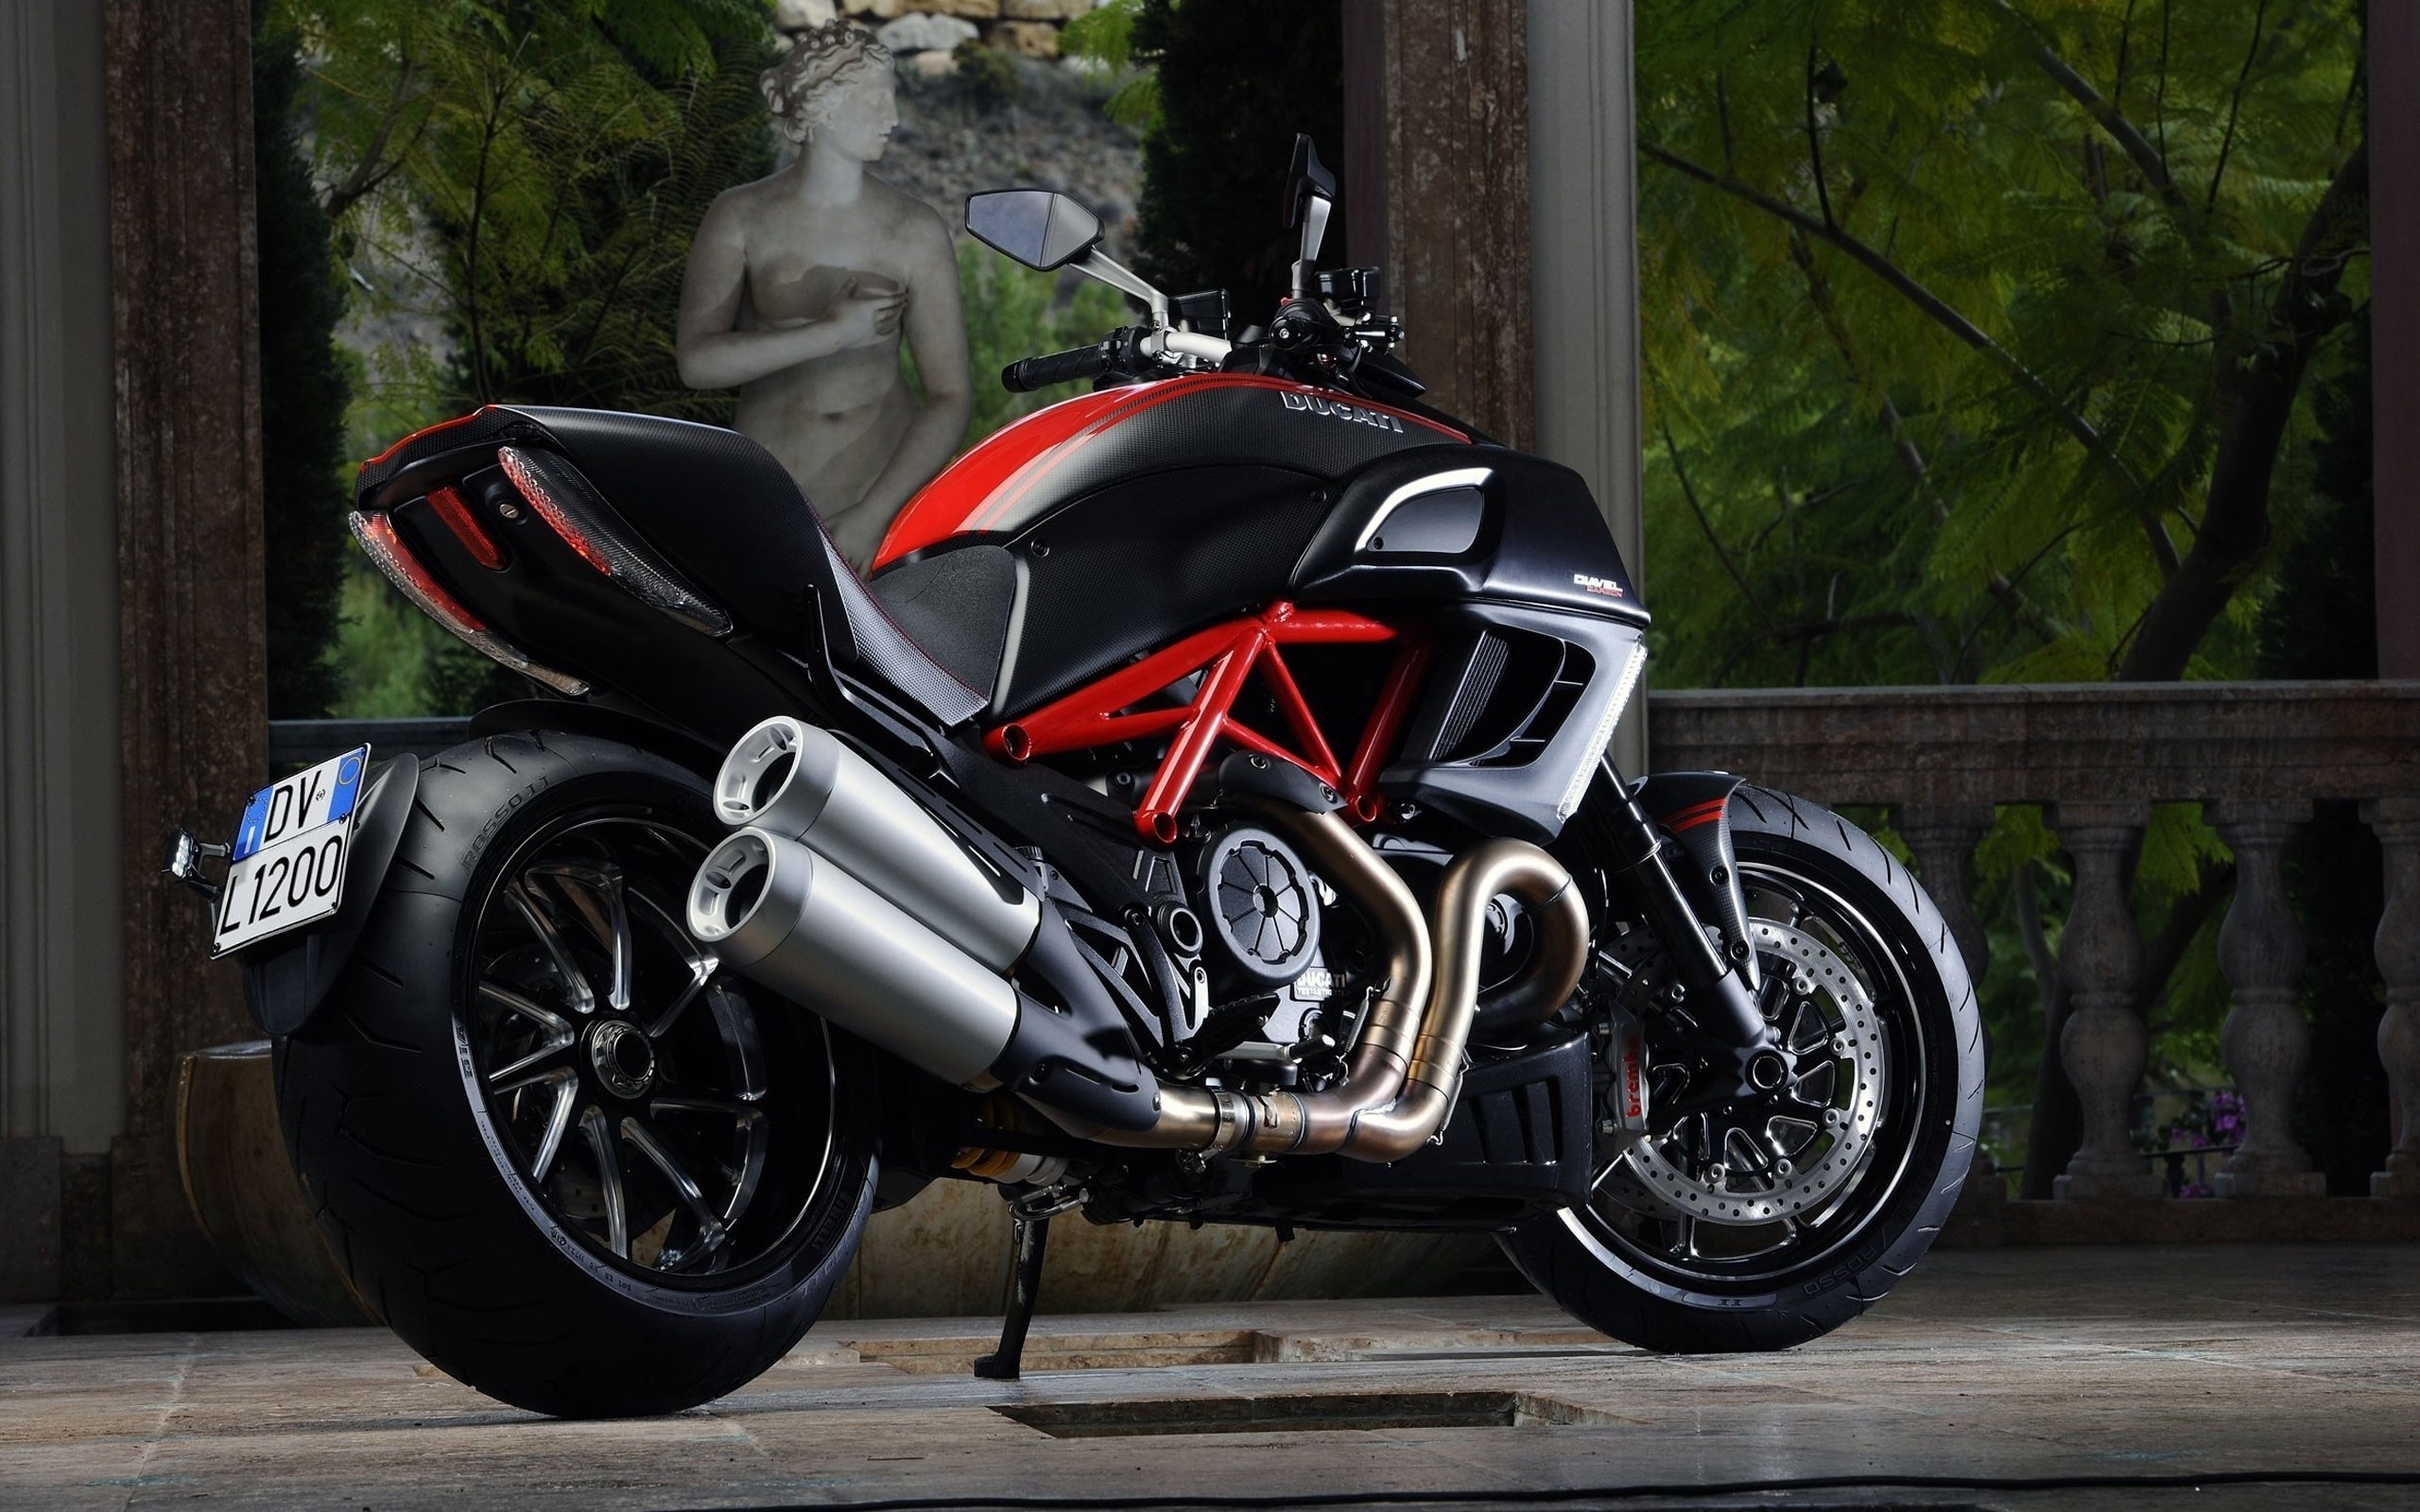 Ducati XDiavel, HD bikes wallpapers, Thrilling rides, Motorcycle enthusiasts, 2560x1600 HD Desktop